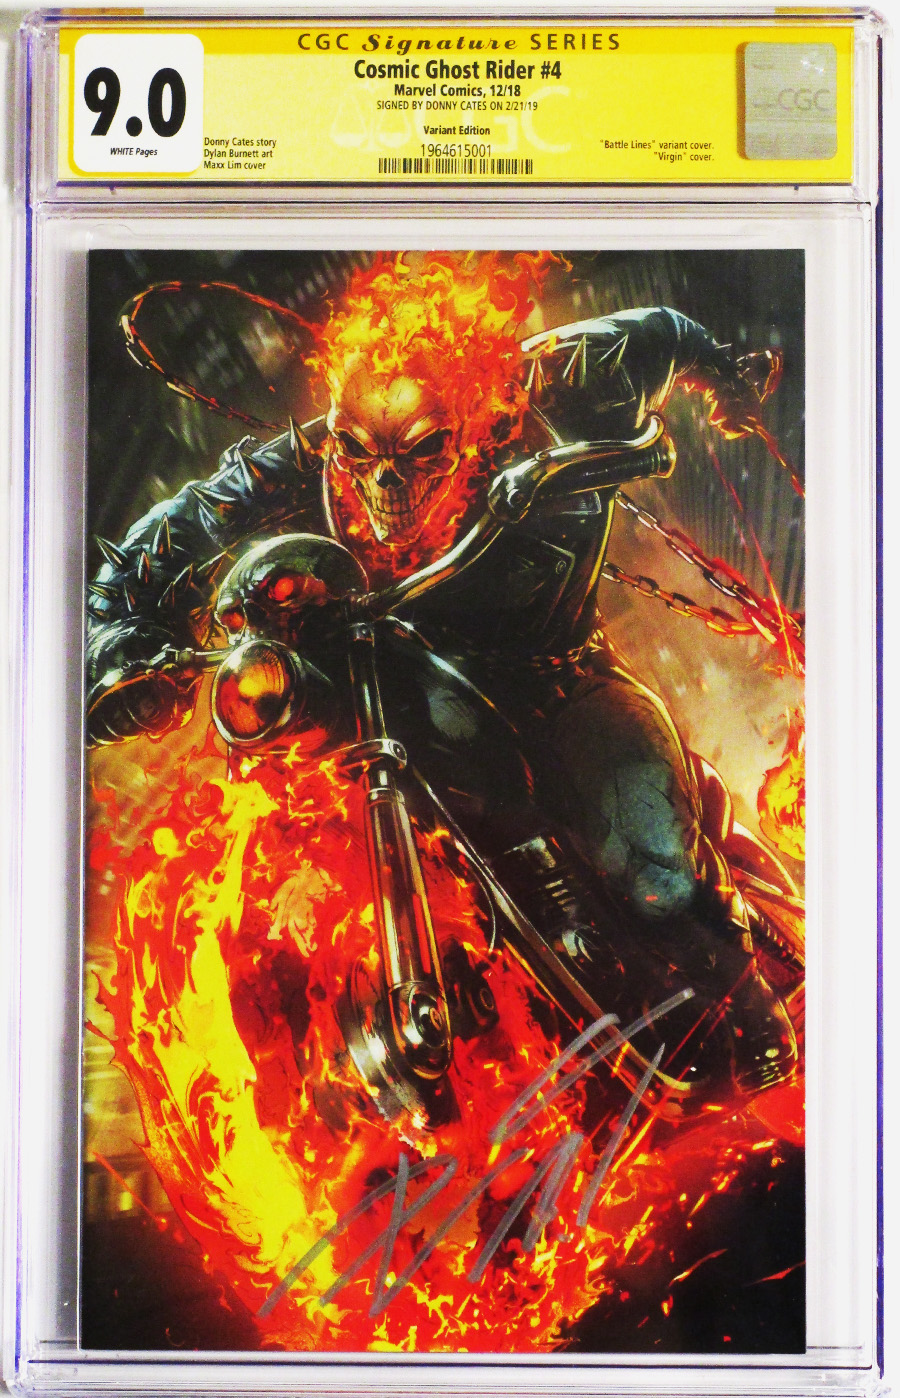 Cosmic Ghost Rider #4 Cover F Variant Maxx Lim Marvel Battle Lines Cover CGC Signature Series 9.0 Signed by Donny Cates